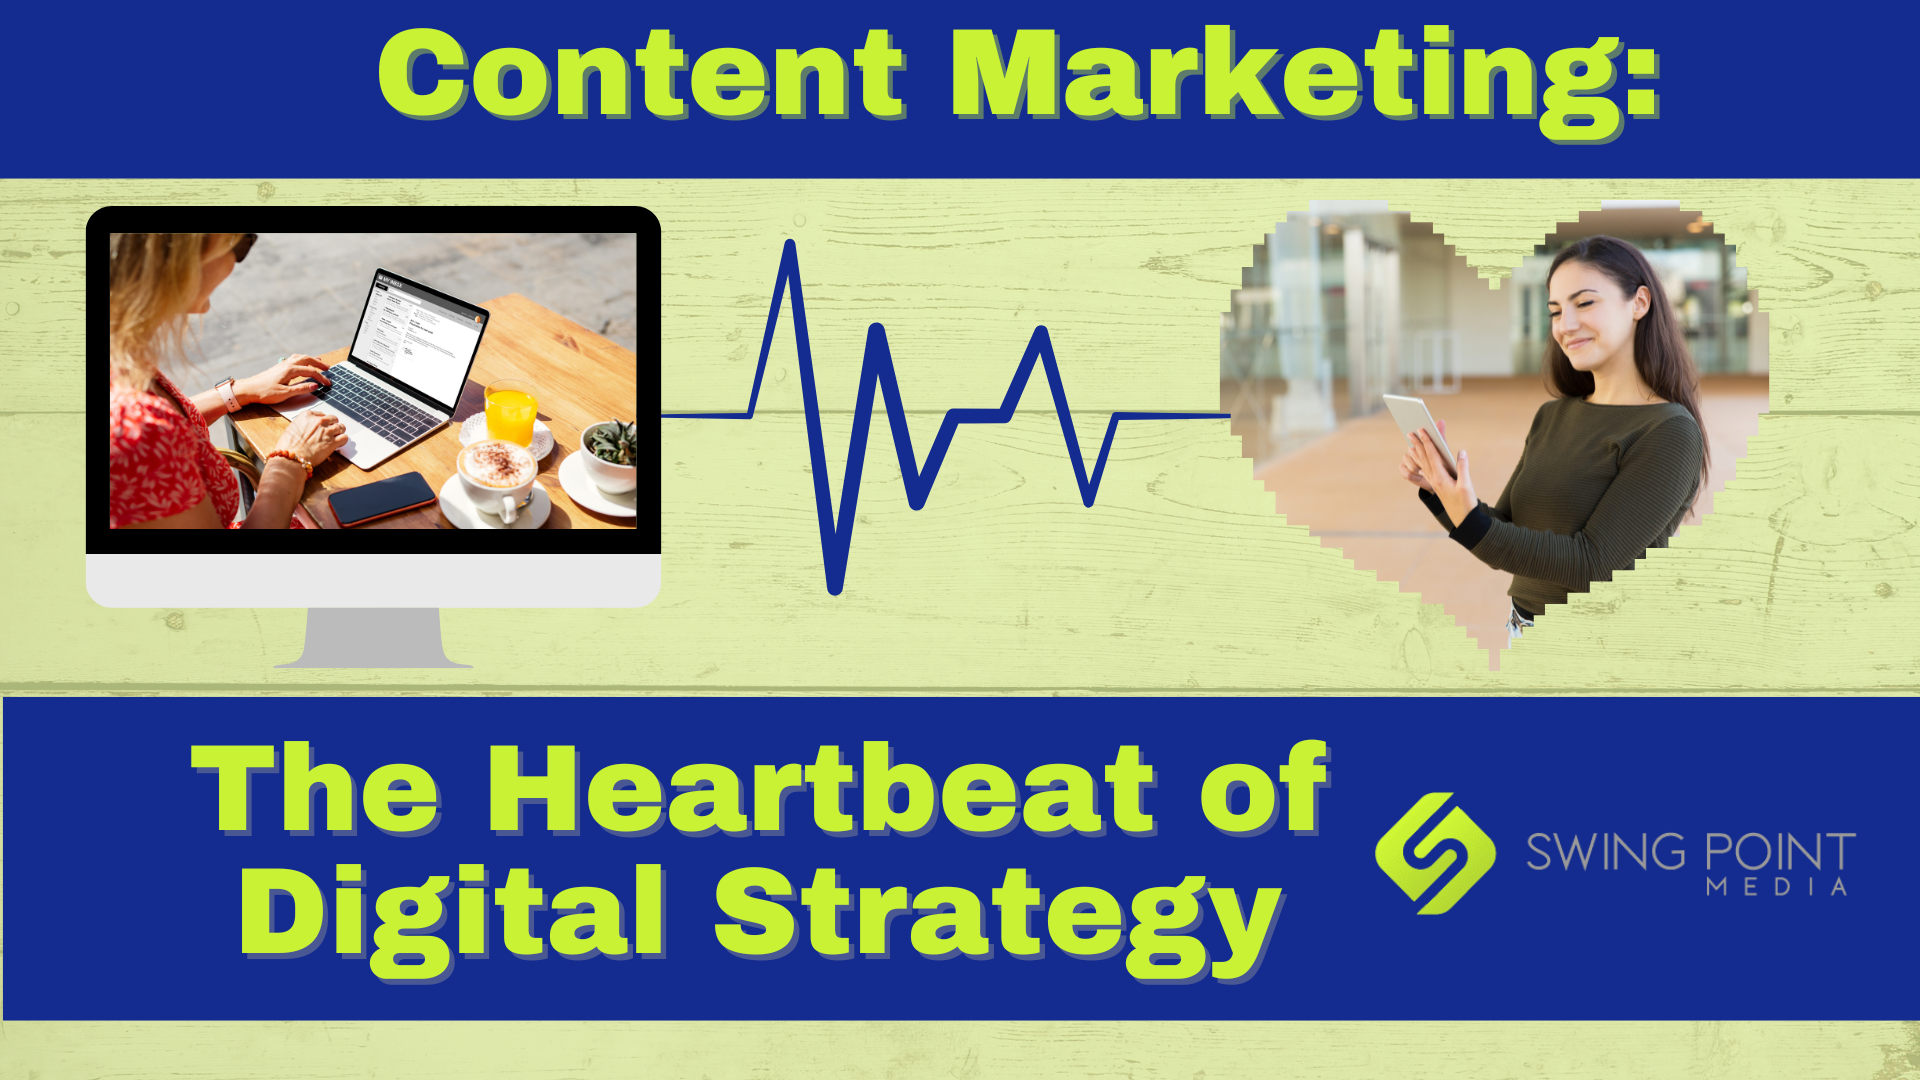 Content Marketing: The Heartbeat of Digital Strategy